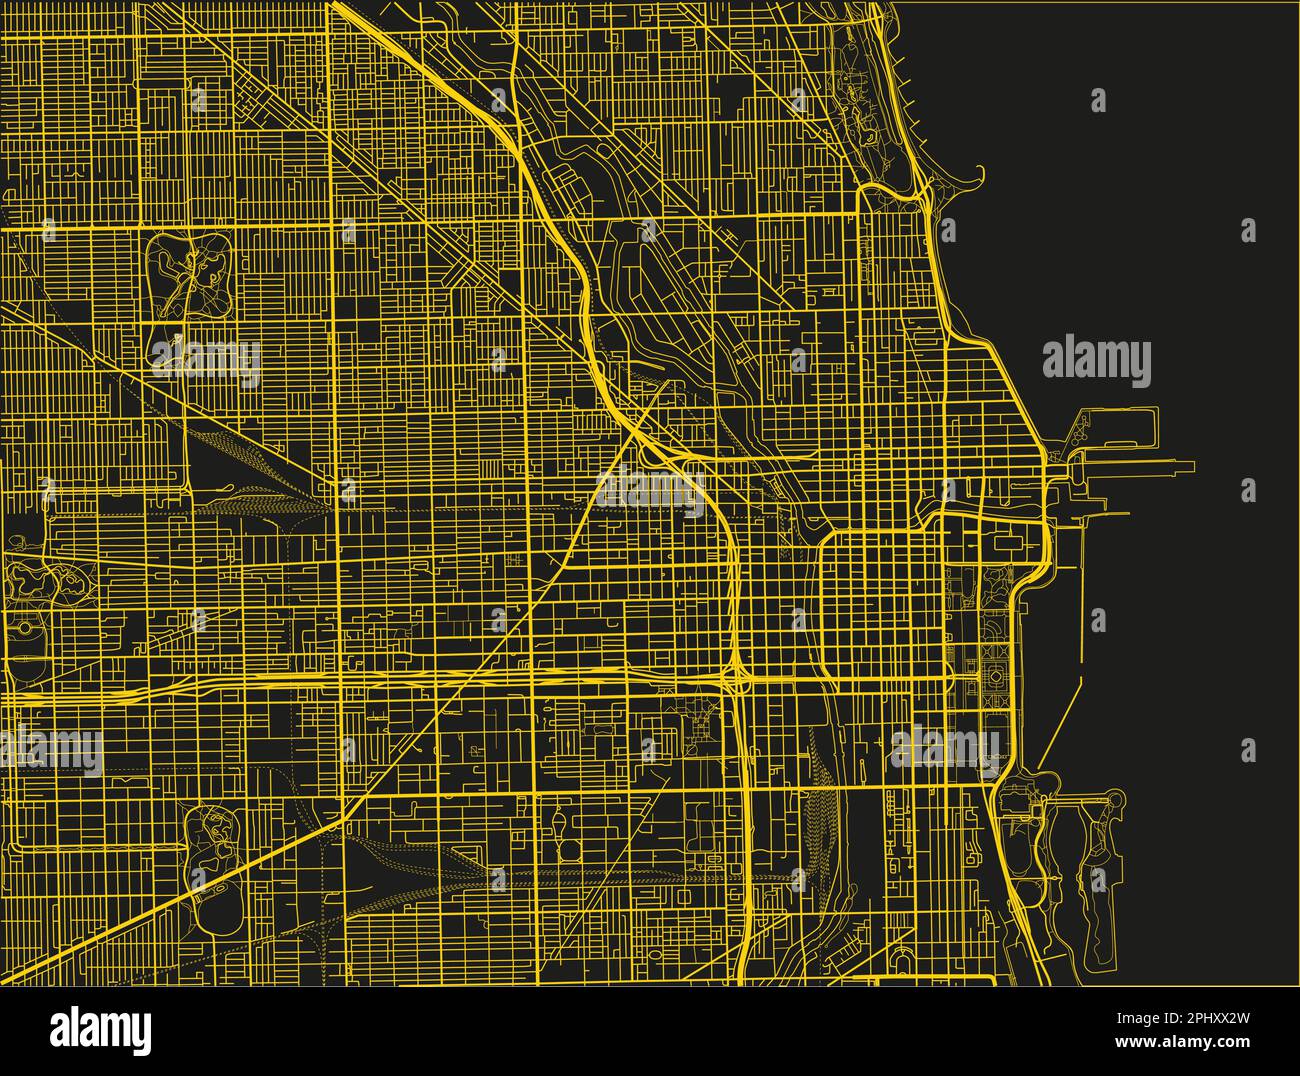 Black and yellow vector city map of Chicago with well organized separated layers. Stock Vector